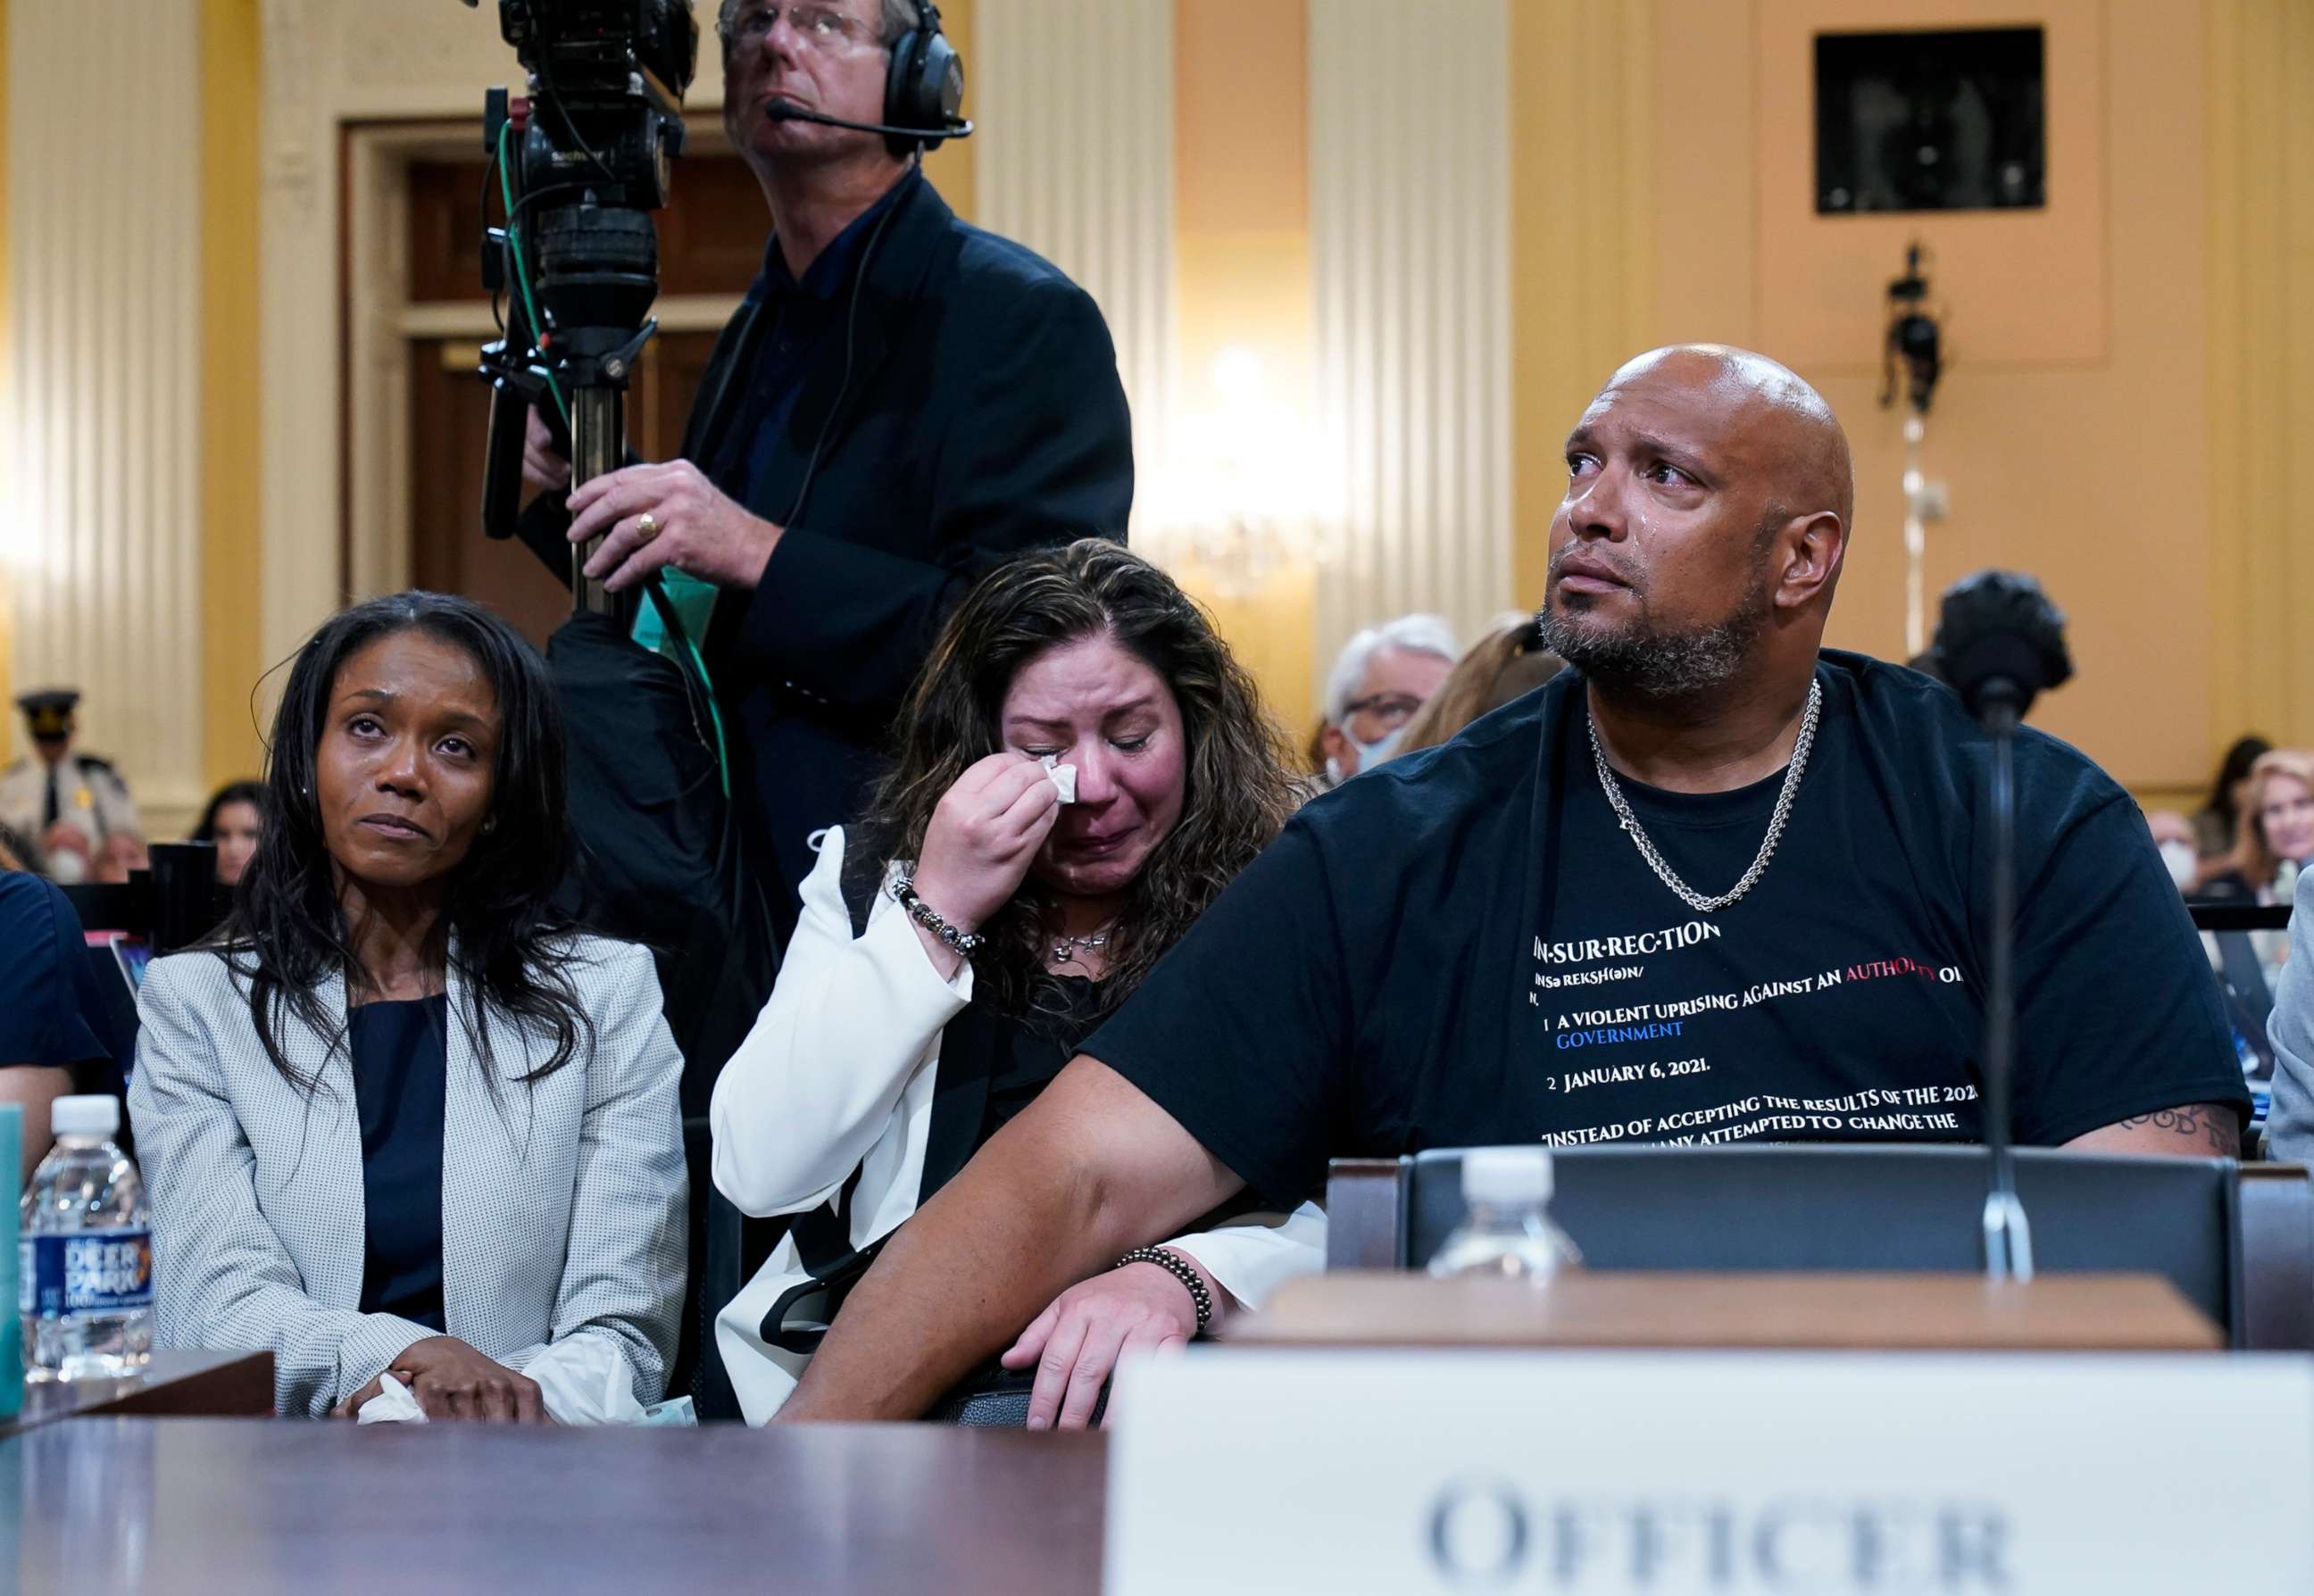 PHOTO: Serena Liebengood, widow of Capitol Police officer Howie Liebengood, Sandra Garza, partner of fallen Capitol Police Officer Brian Sicknick and Capitol Police Sgt. Harry Dunn, watch a video of the Jan. 6 attack during a public hearing, June 9, 2022.